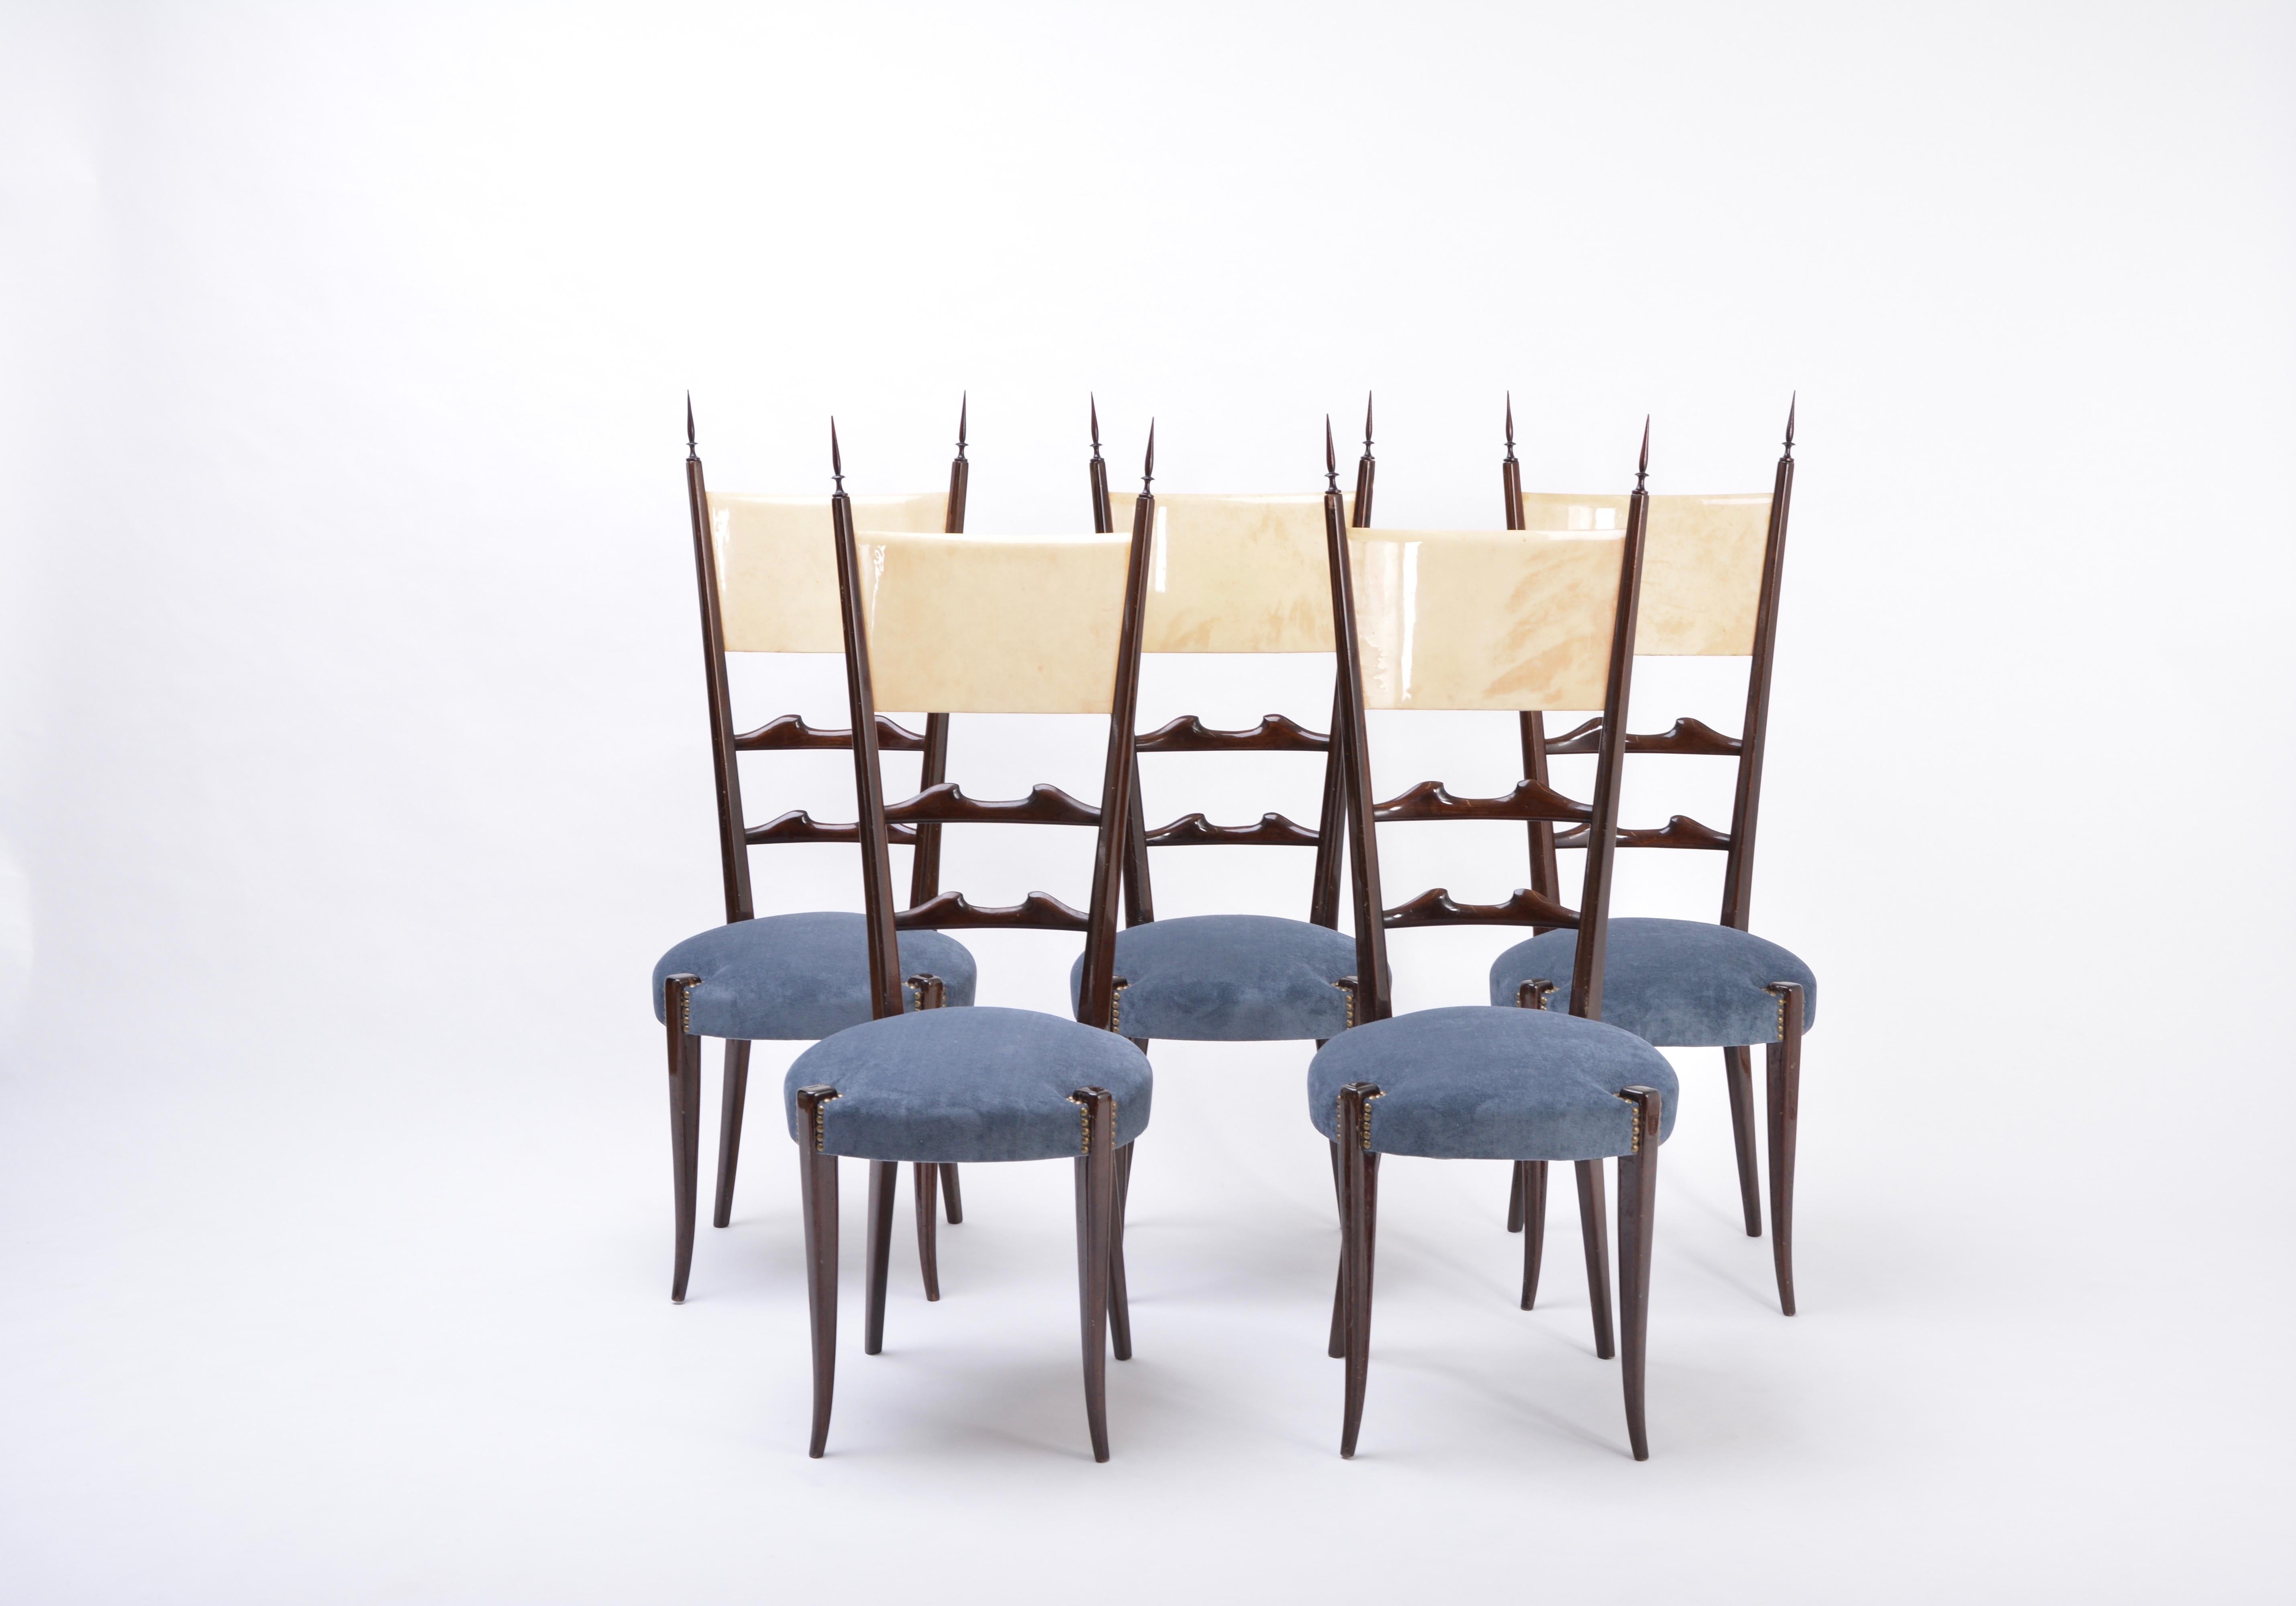 A set of five tall ladder-back dining chairs by Aldo Tura, circa 1950's. The chairs frames are made of gloss black ebonized wood and the backrests feature lacquered goatskin parchment applied on both front and back.
Born in 1909, Italian